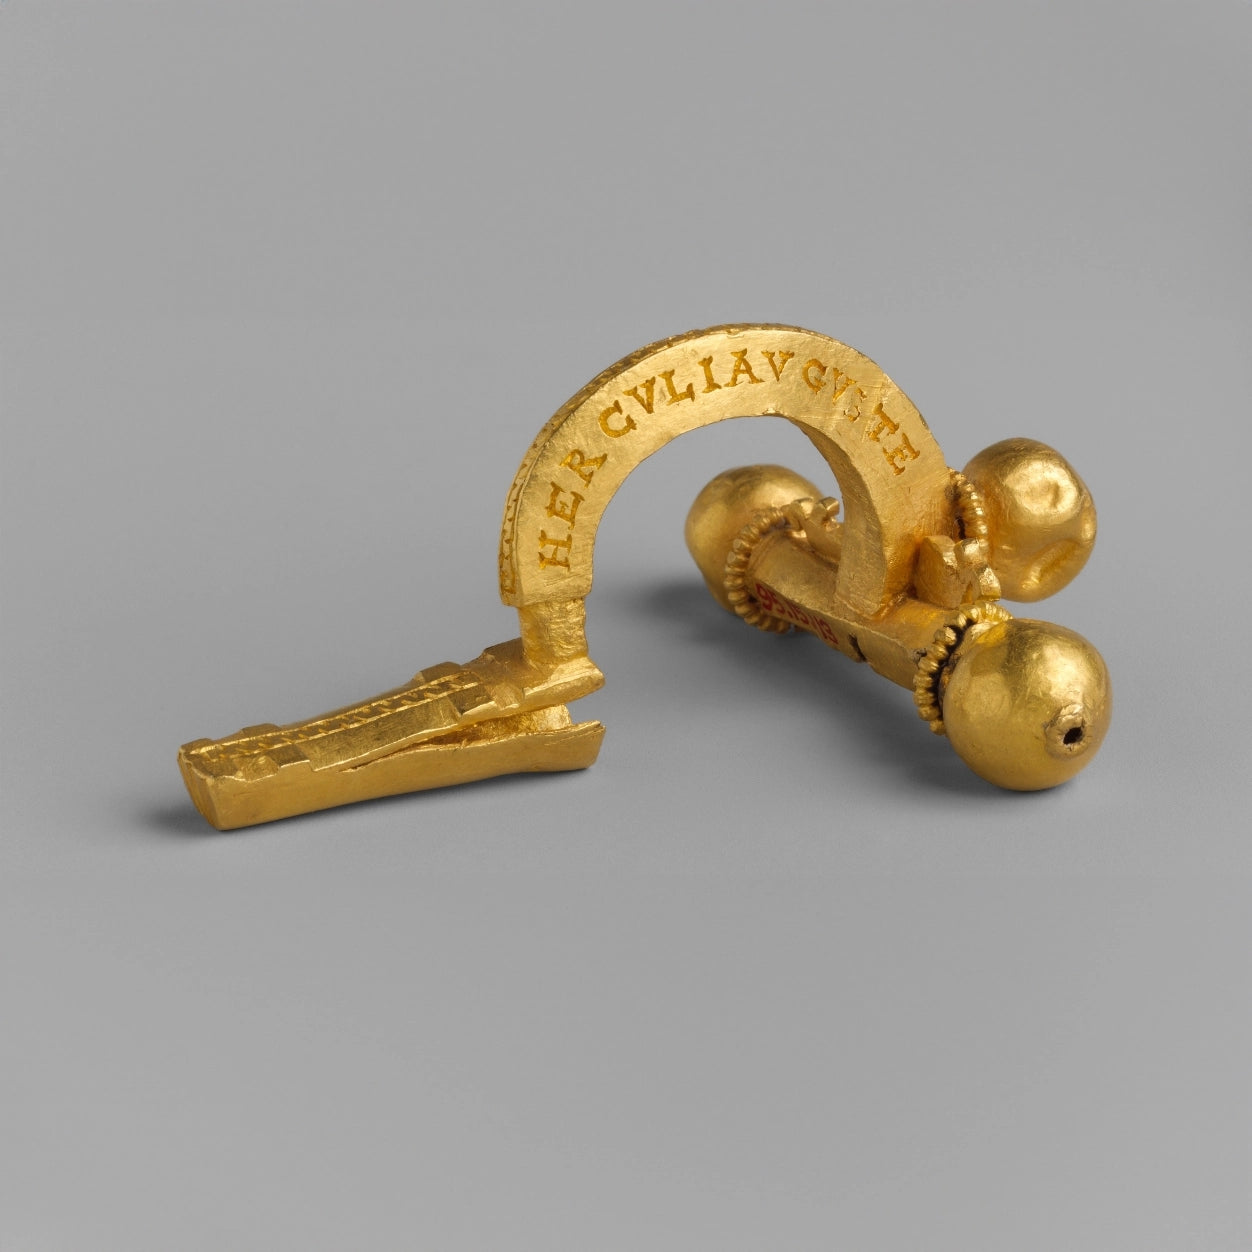 Crossbow fibula. Military insignia. Roman 286CE-305CE. Gold and silver. Met Museum.